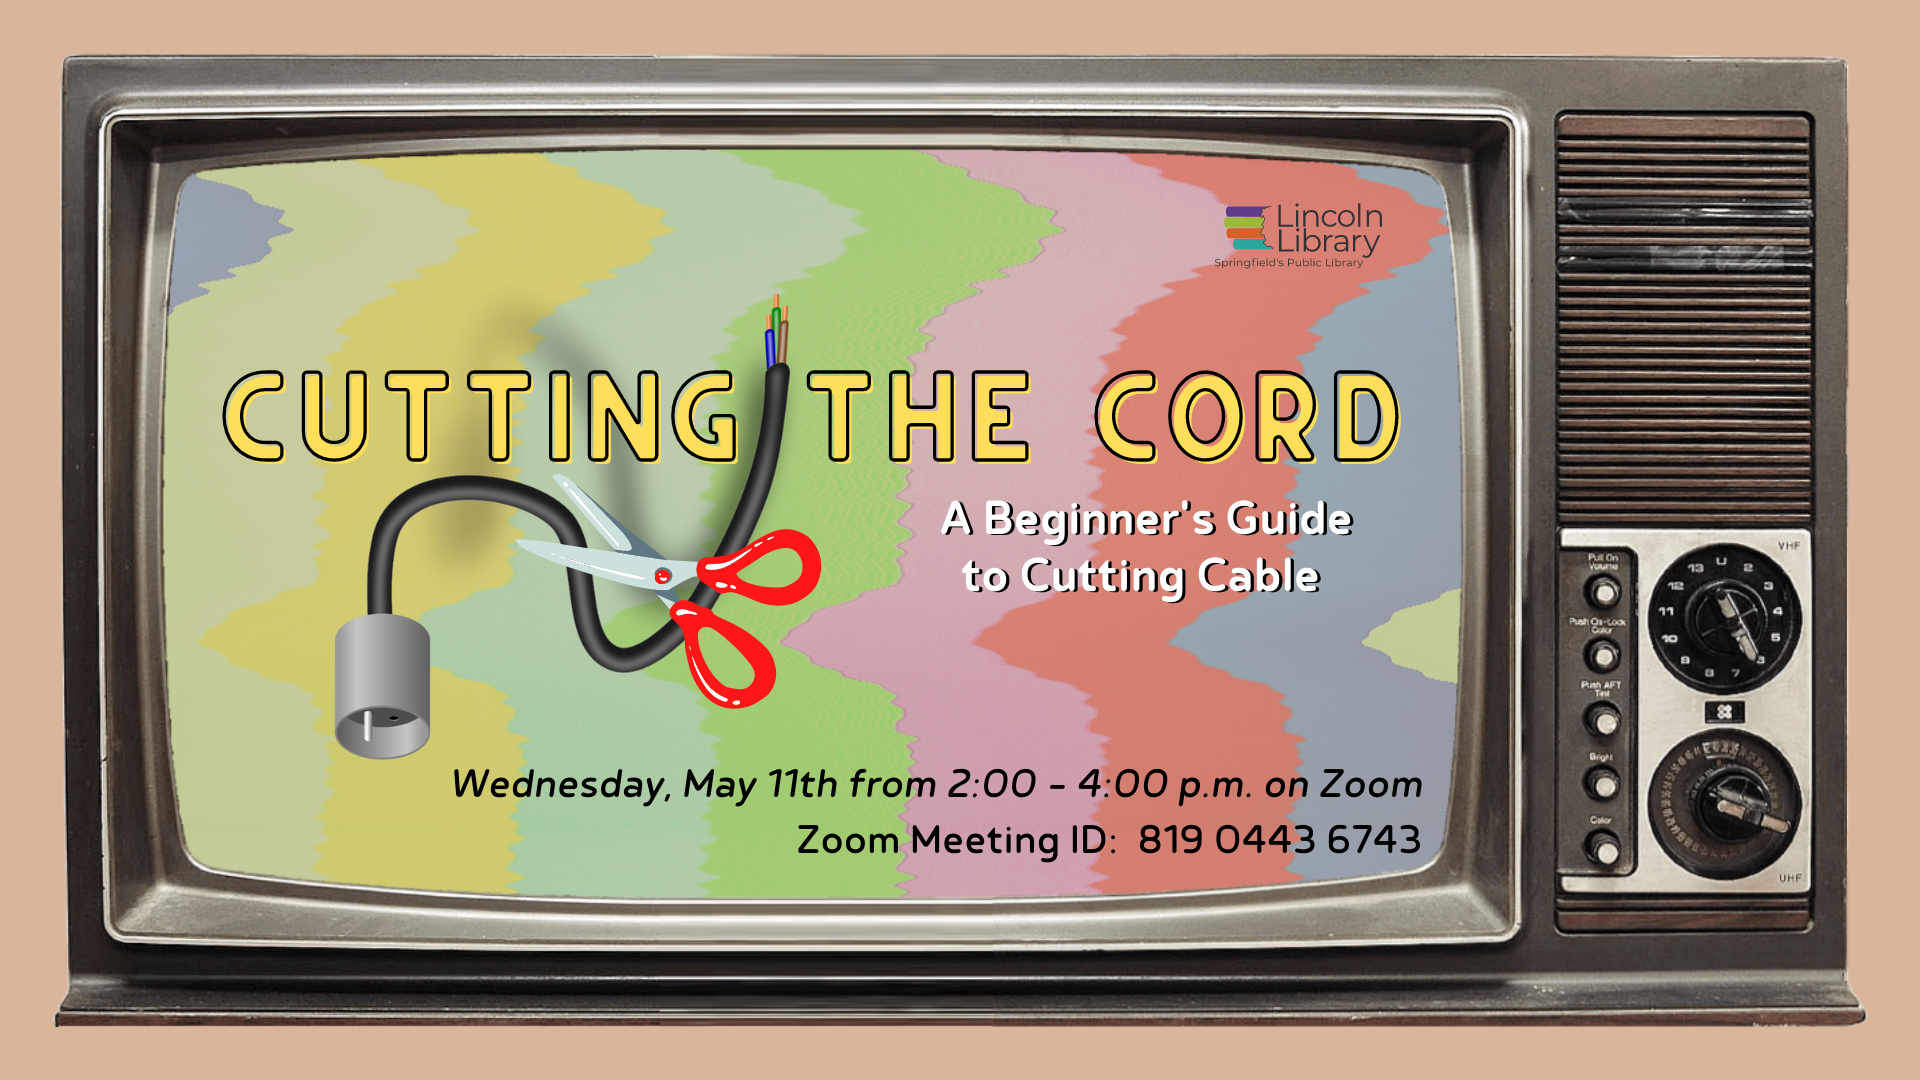 Flyer for "Cutting the Cord: A Beginner's Guide to Cutting Cable" which will be held on Wednesday, May 11th on Zoom